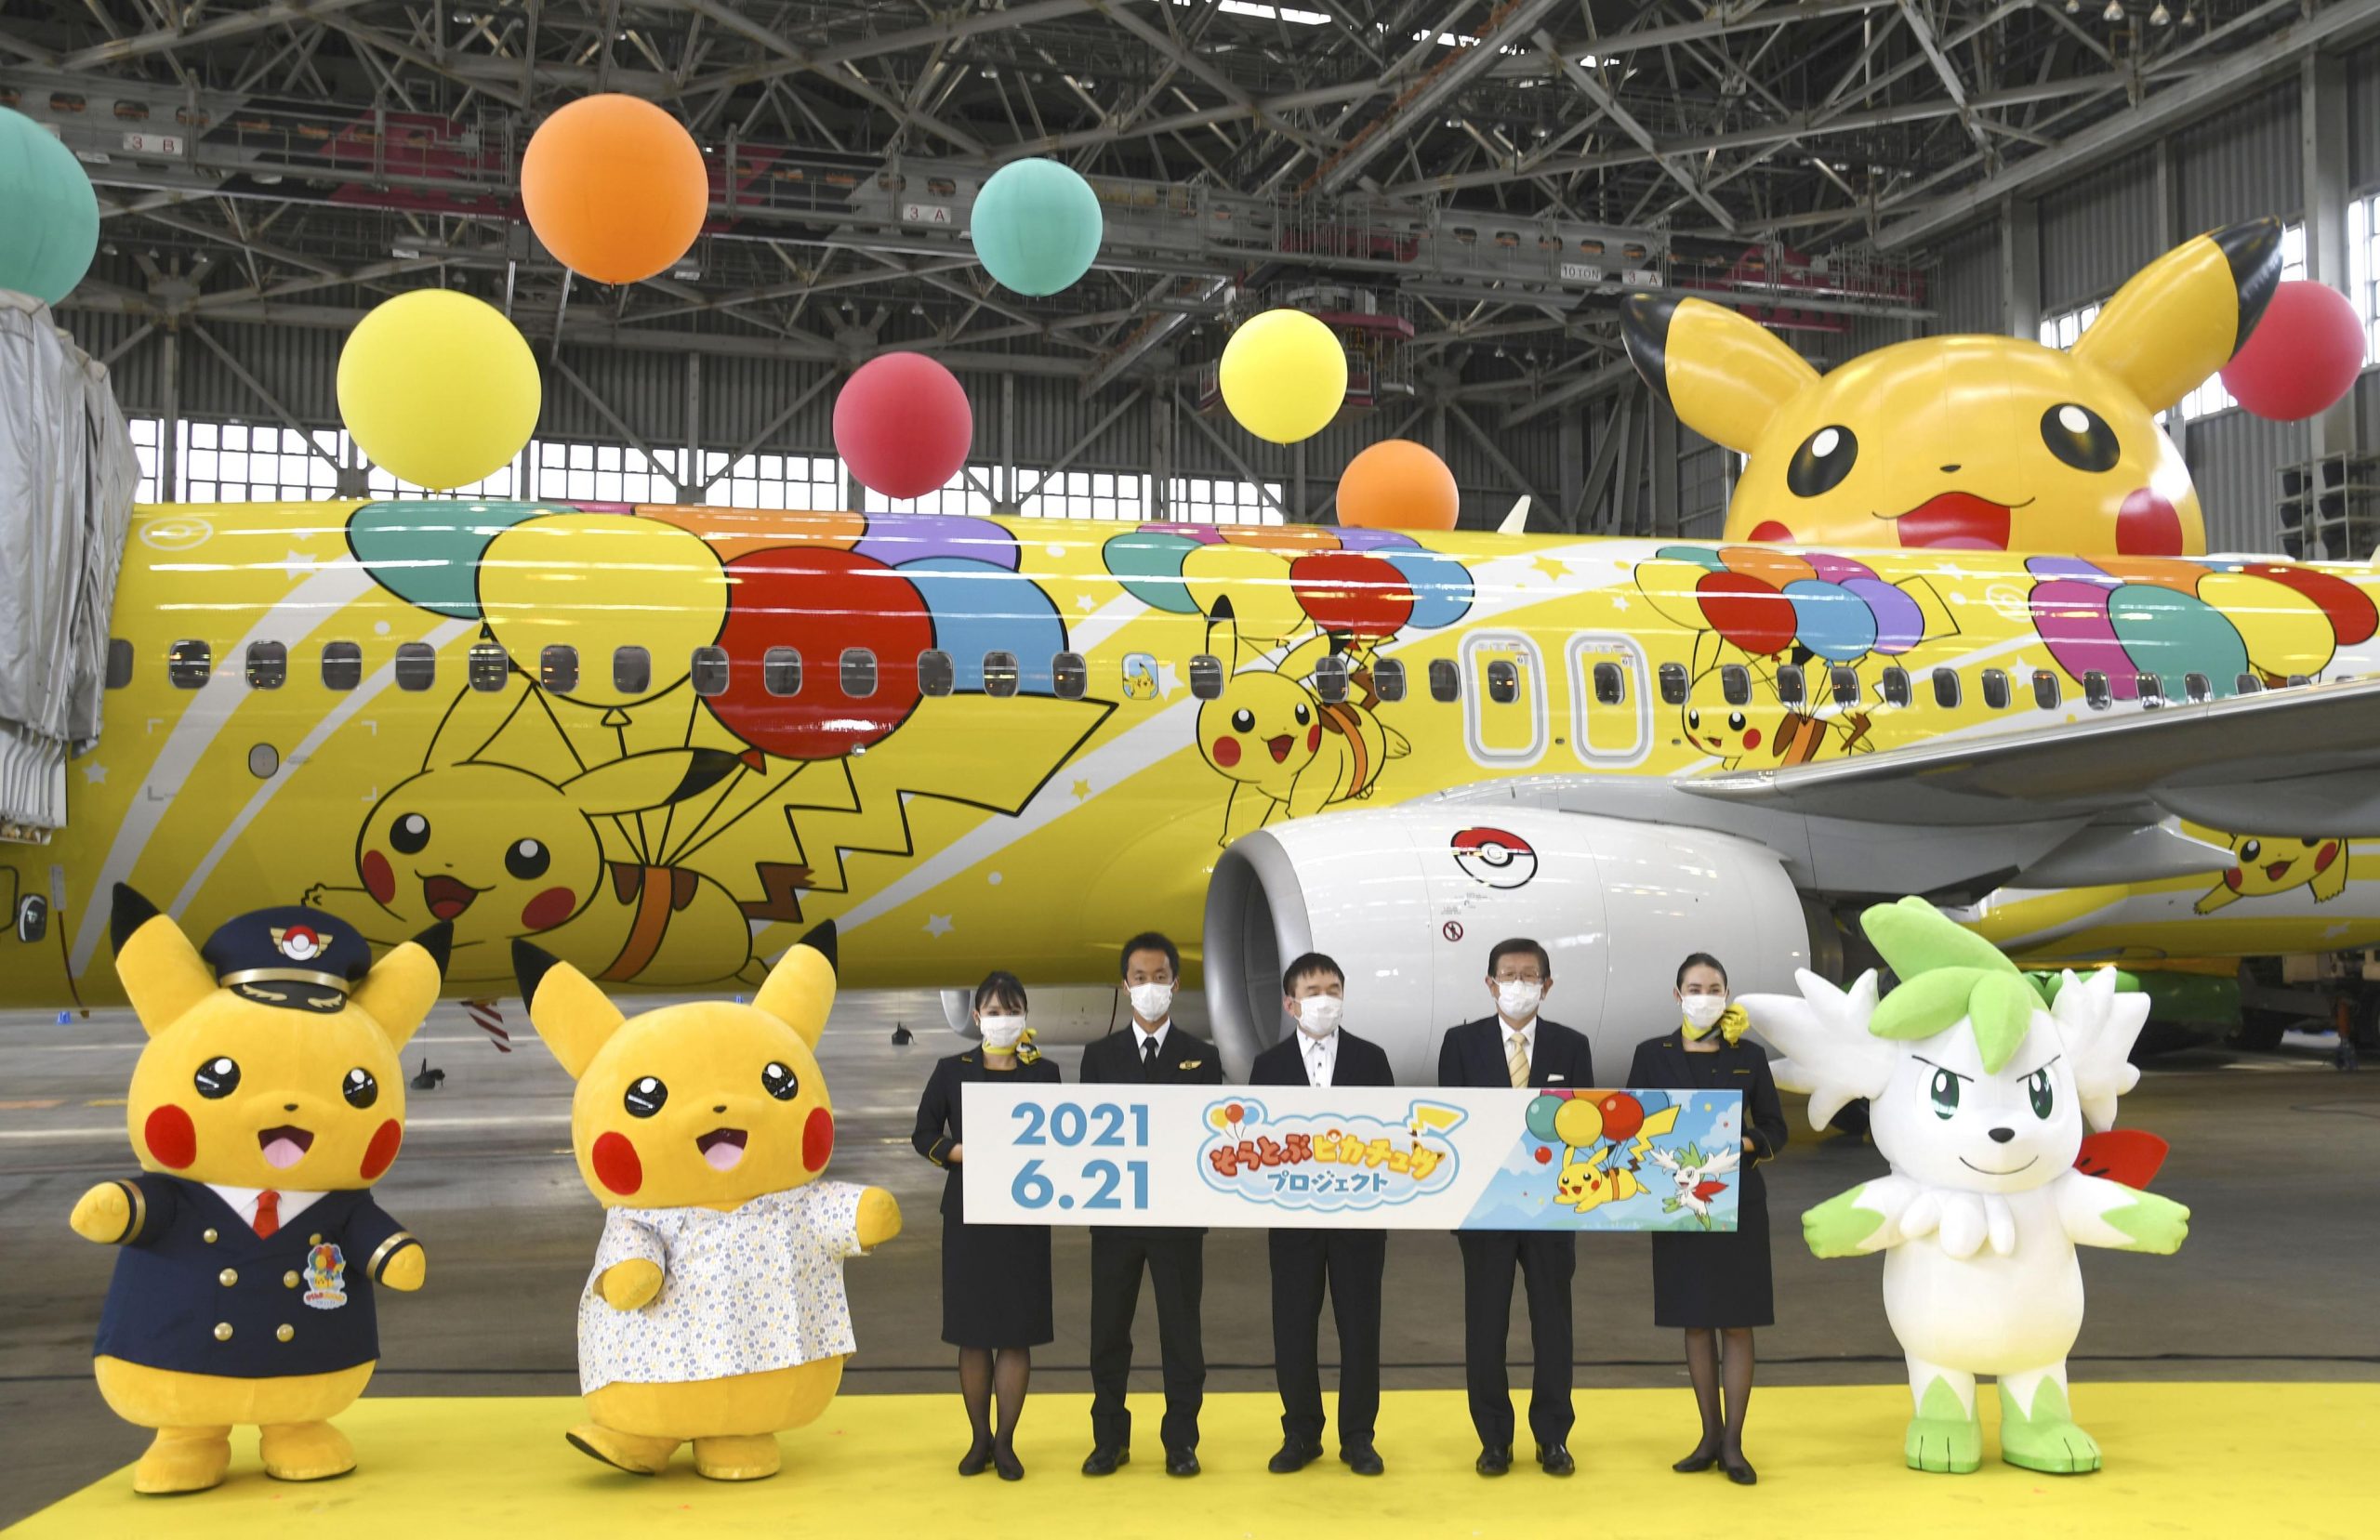 Fasten Your Seat Belts Skymark’s Pikachu Jet Takes Off From Okinawa